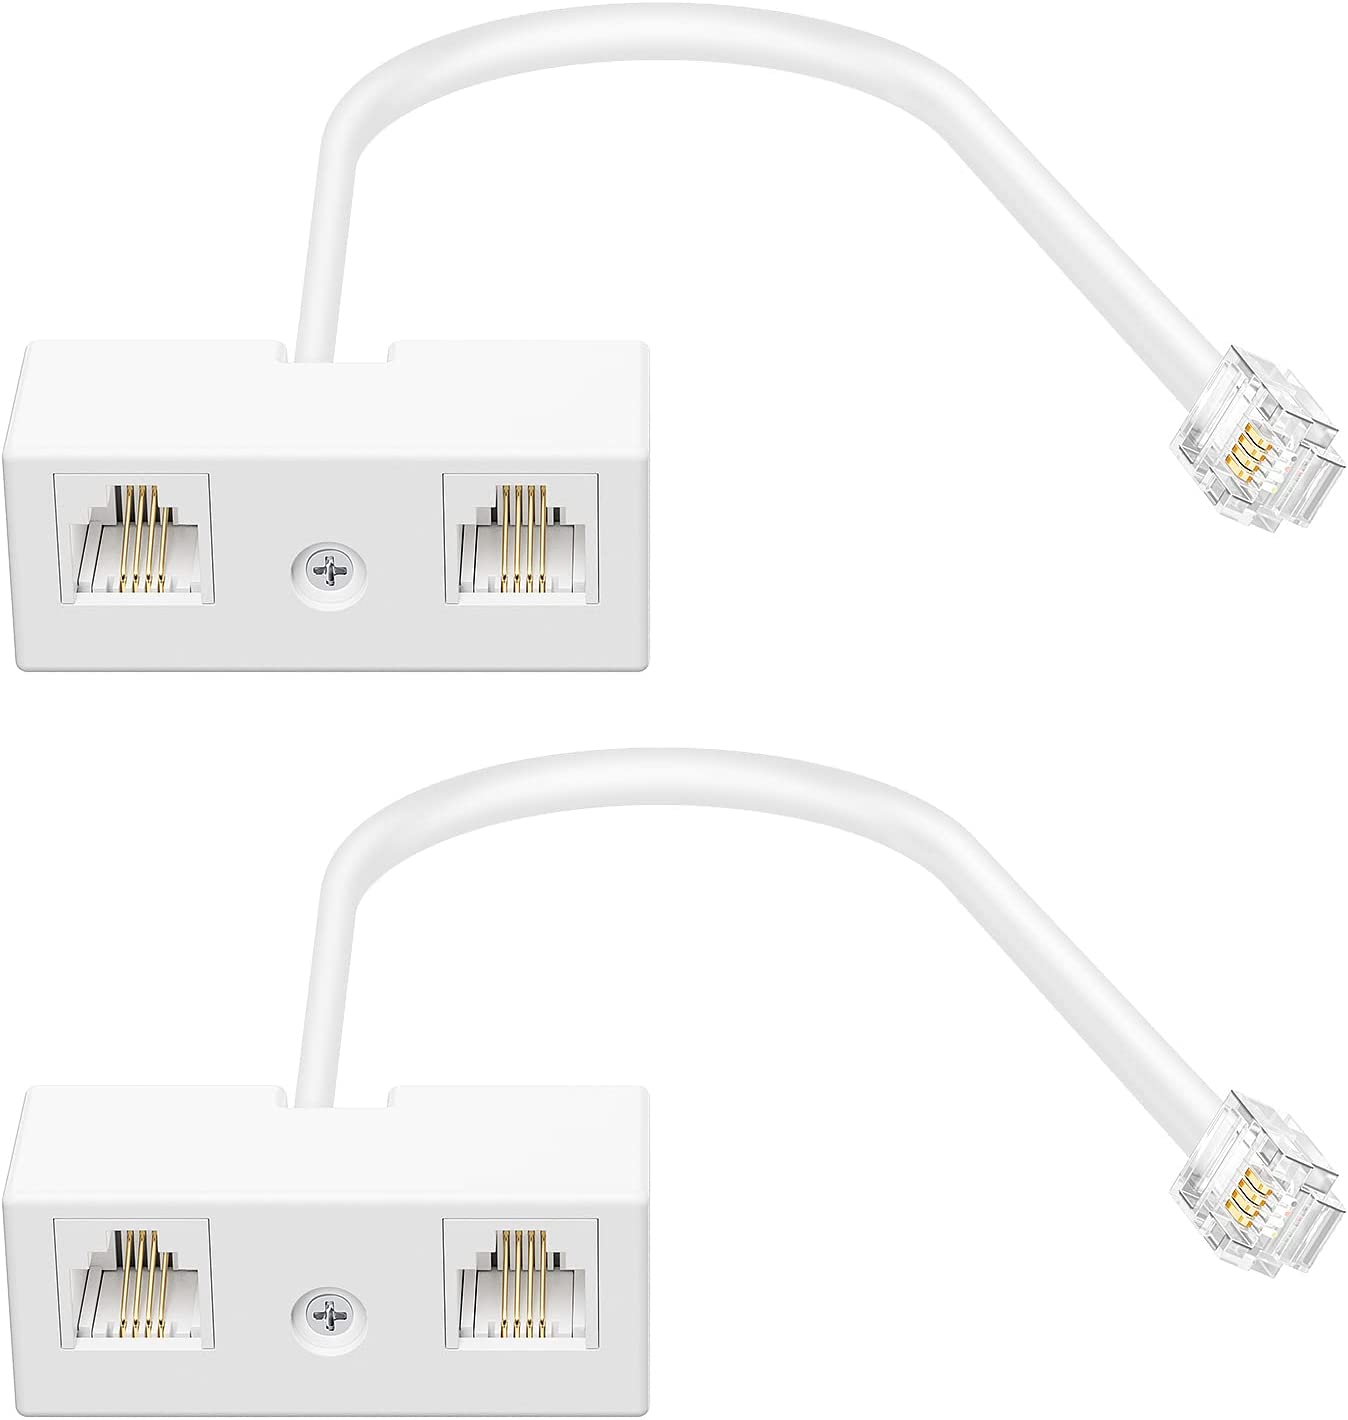 Uvital RJ11 Male to dual Female 6P4C Splitter Converter Cable Male to 2 Female Separator Cord RJ11 6P4C Telephone Wall Adaptor for Landline 2 Pack 